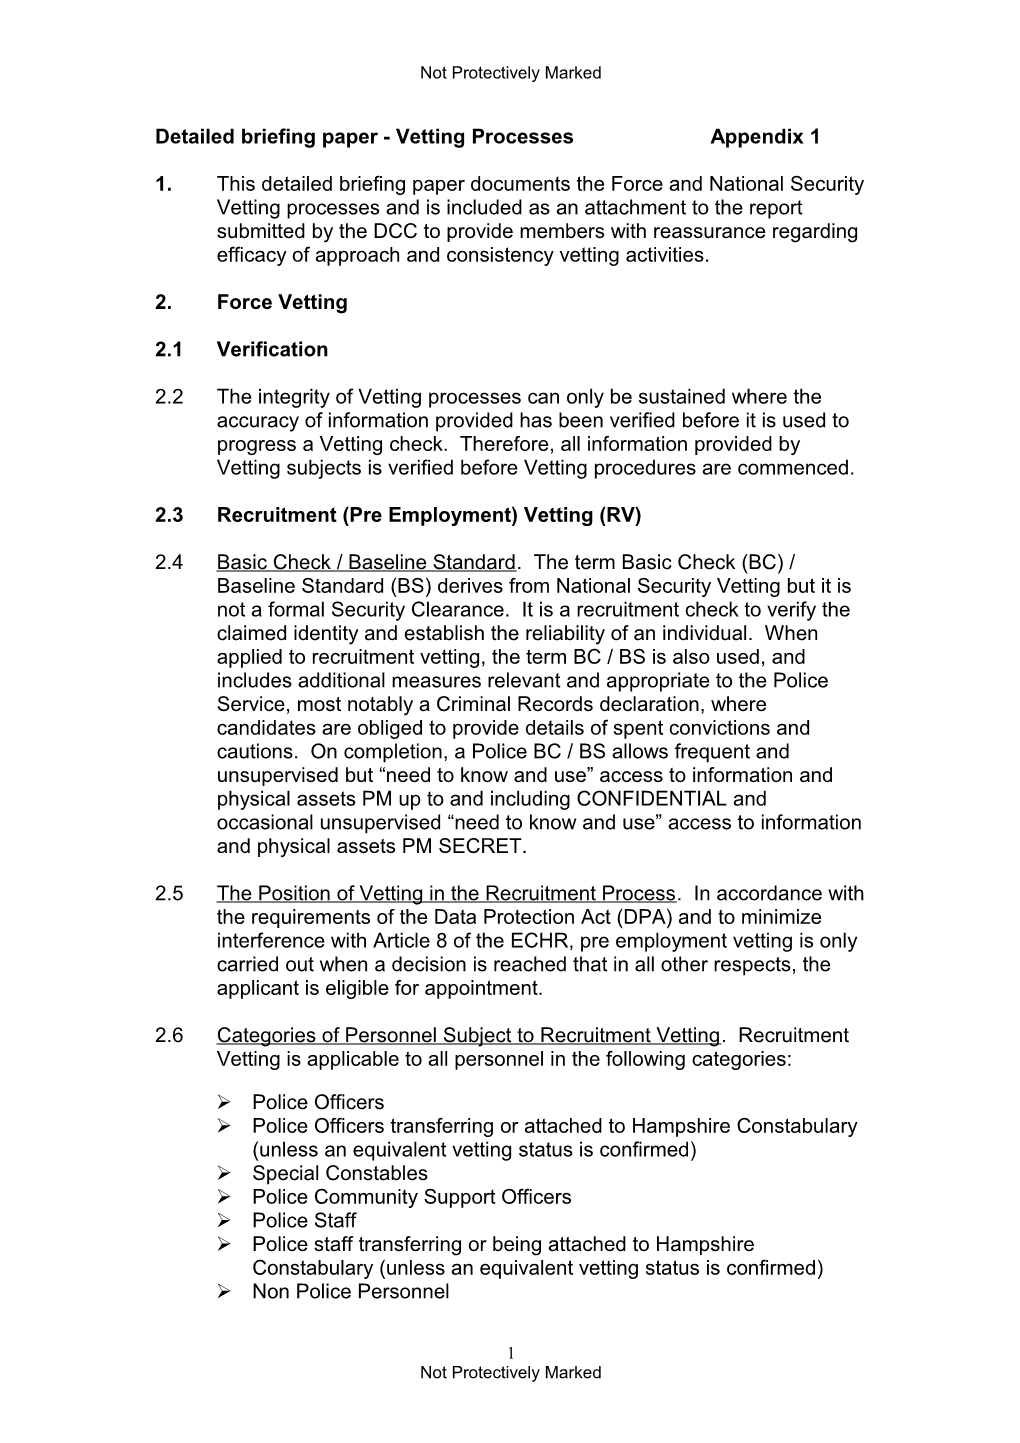 Detailed Briefing Paper - Vetting Processes Appendix 1